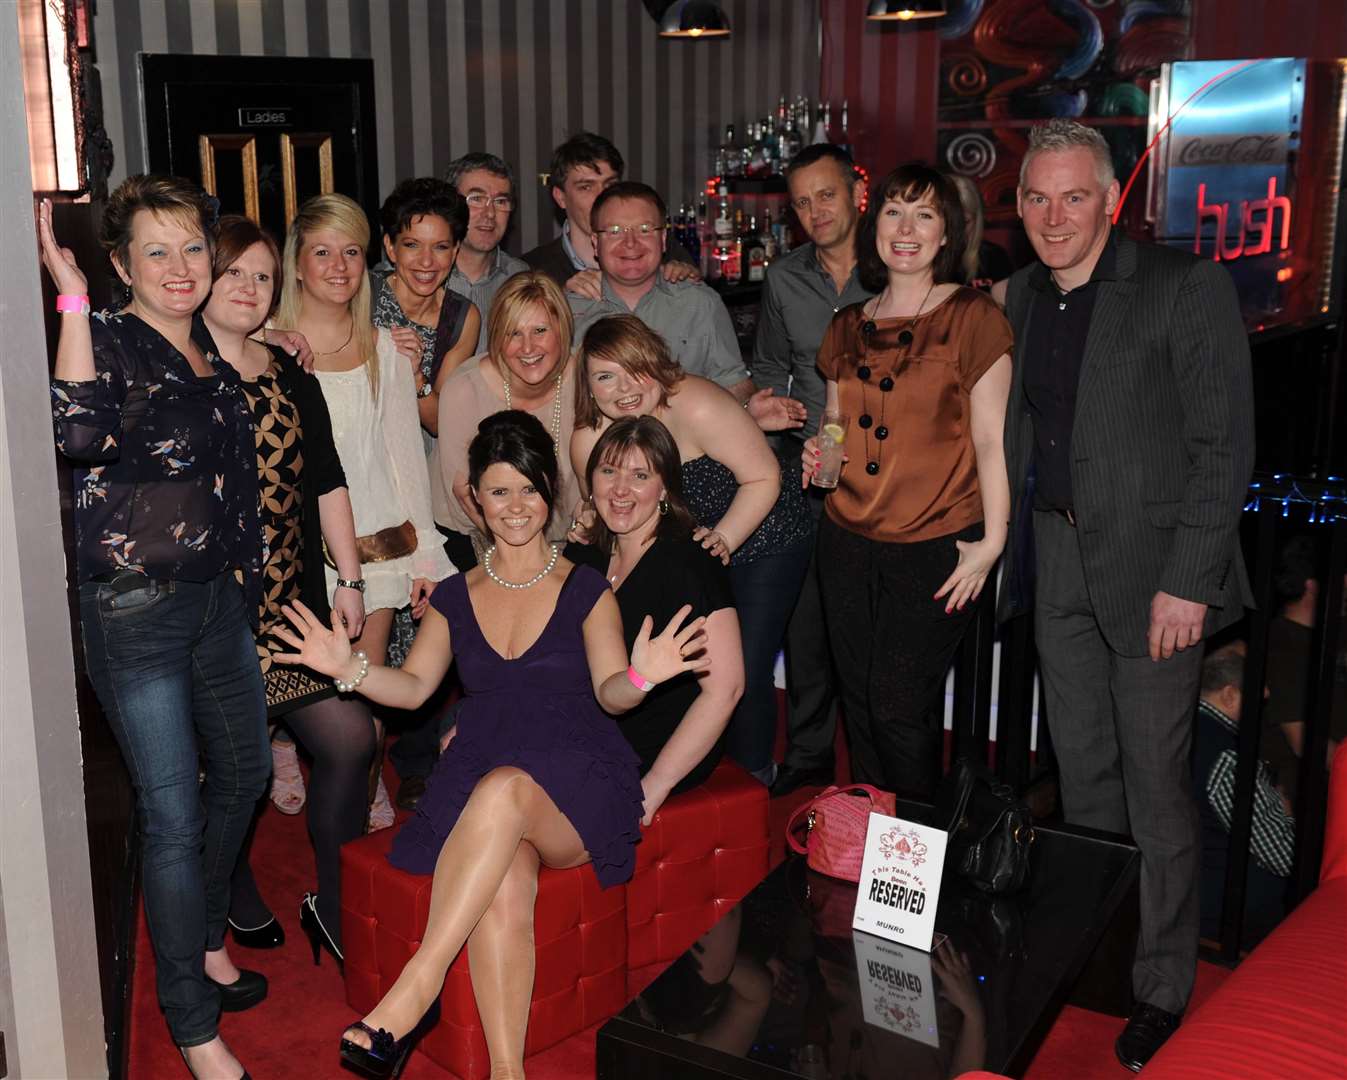 Strictly Inverness Dancers on a bonding night out at Hush Night Club Inverness. Picture by Alasdair Allen.